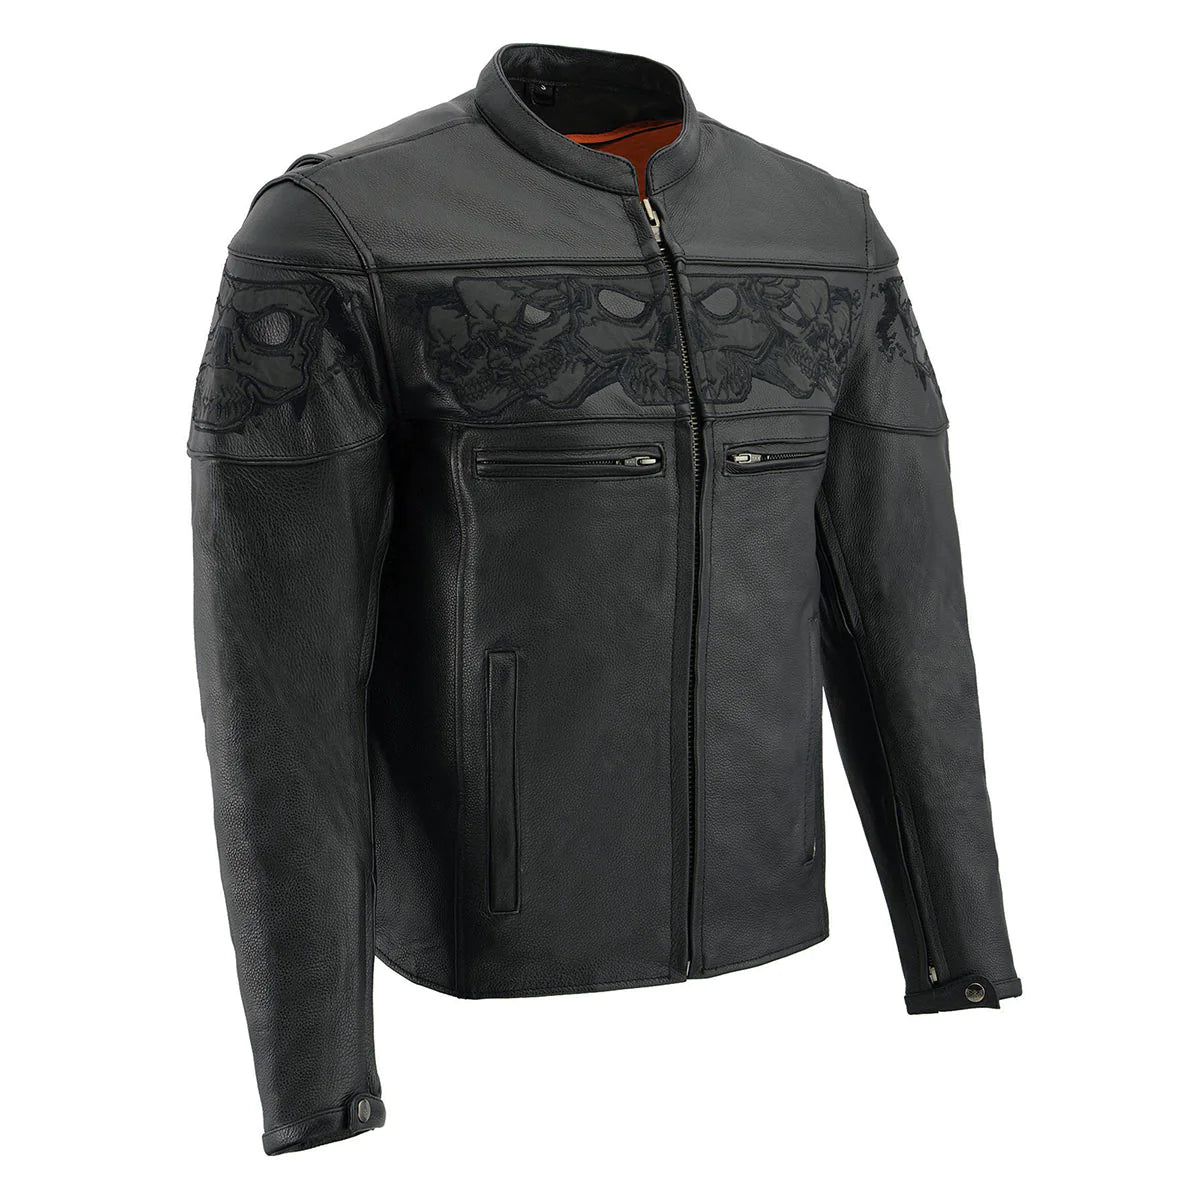 Men's Crossover Black Leather Scooter Jacket with Reflective Skulls